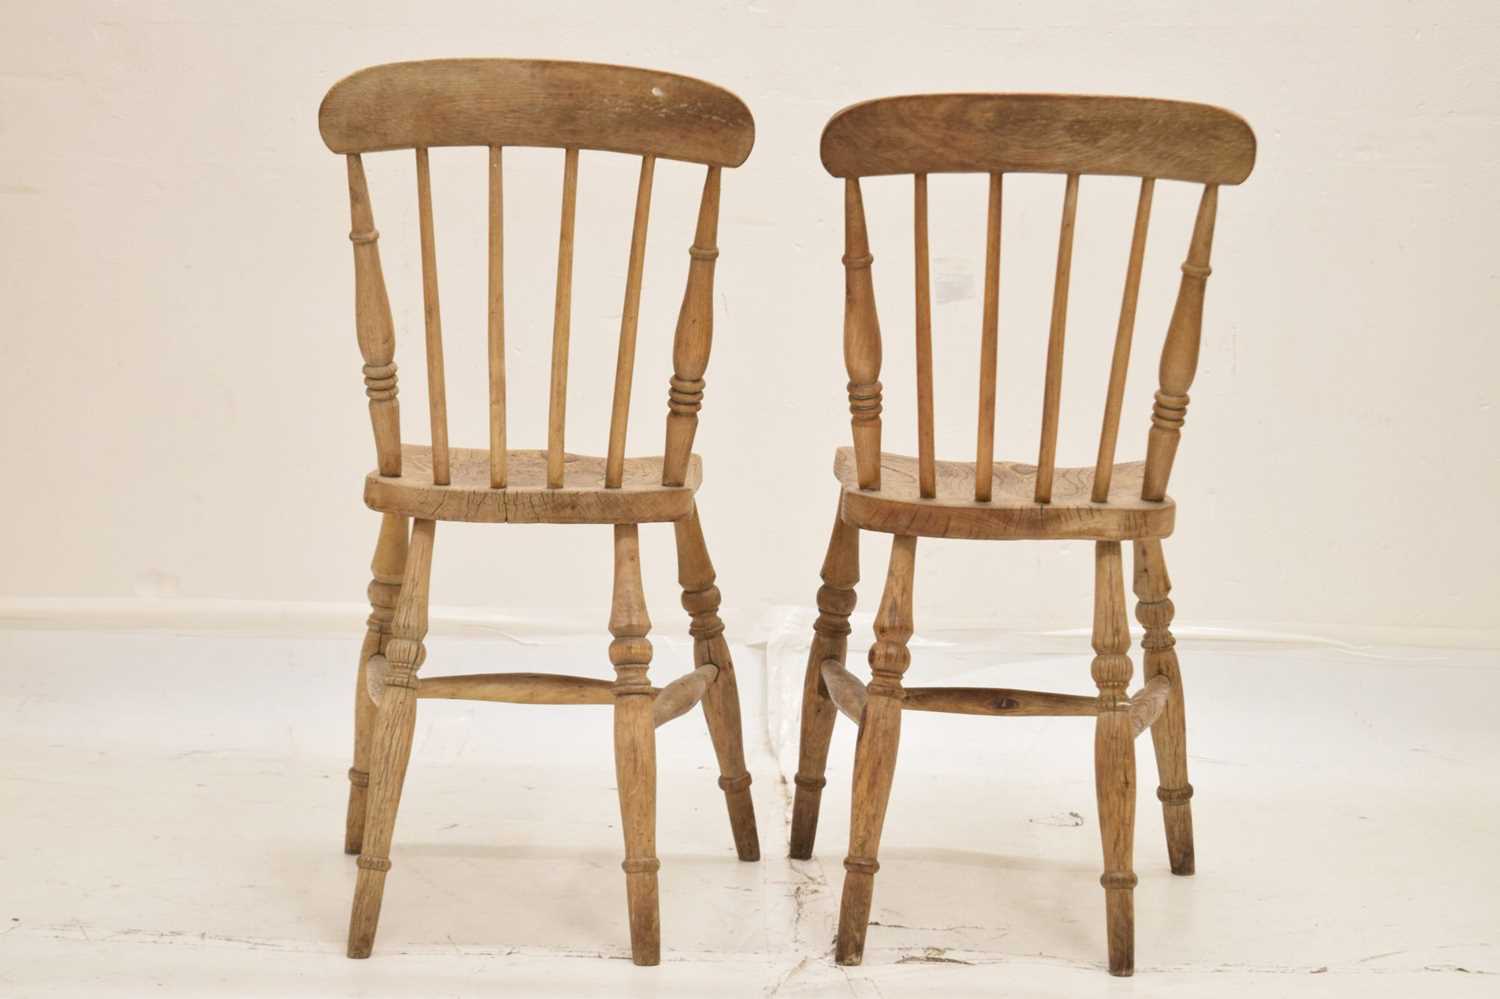 Pair of 19th century country stick back kitchen chairs - Image 6 of 8